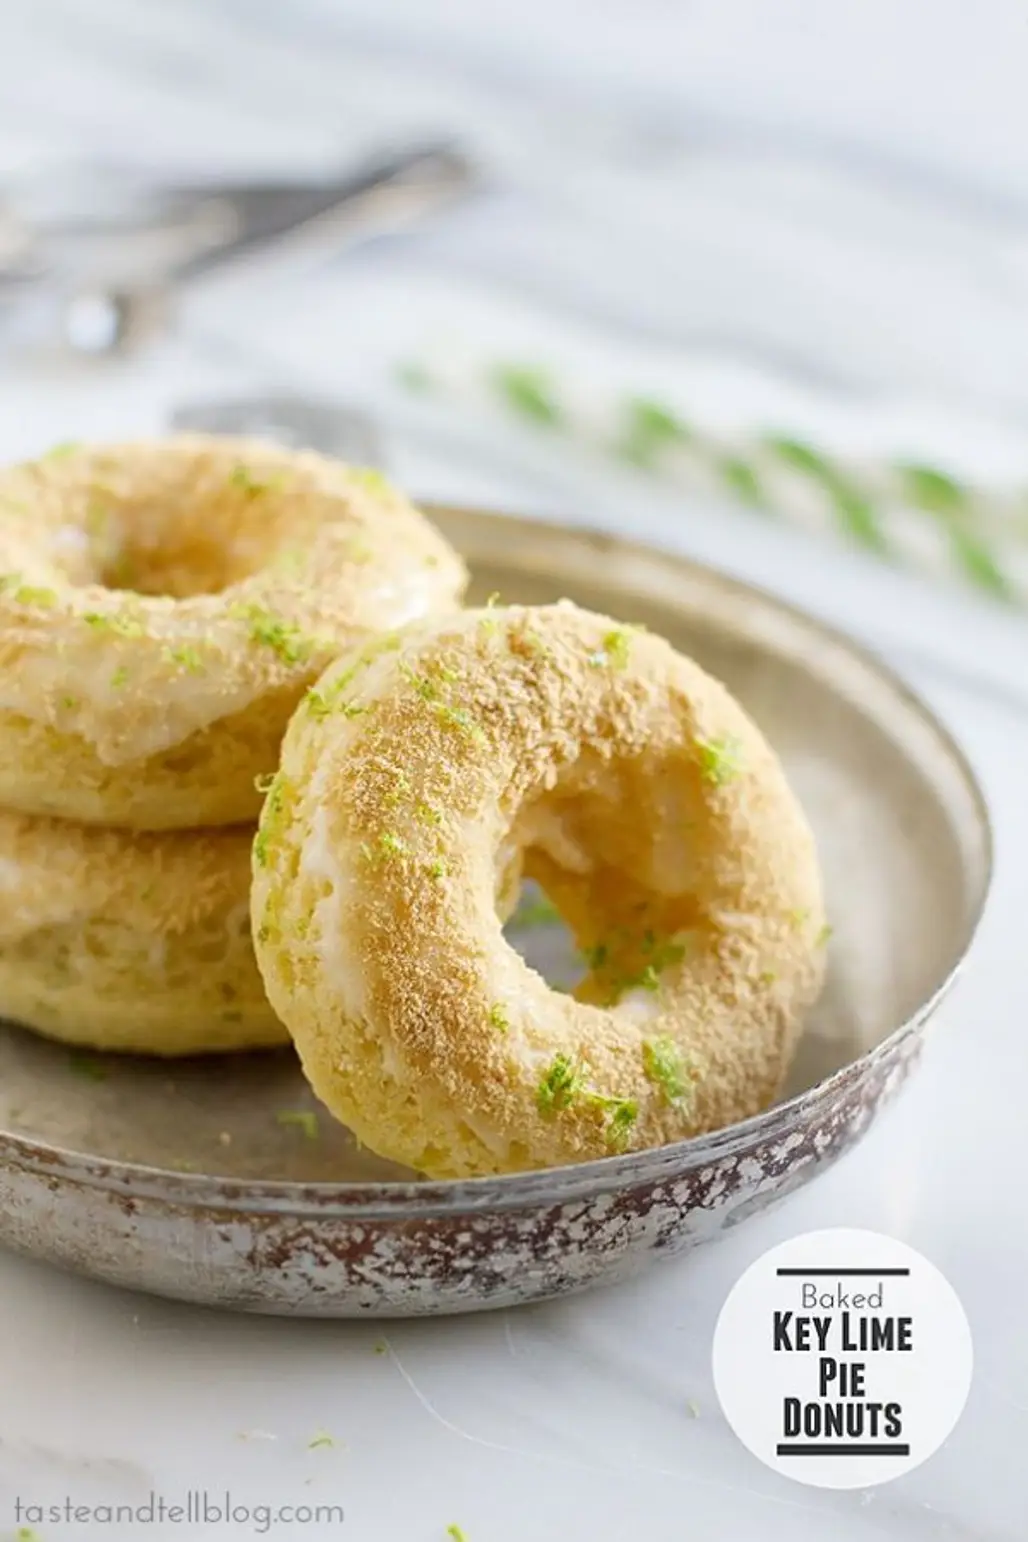 Baked Key Lime Pie Donuts